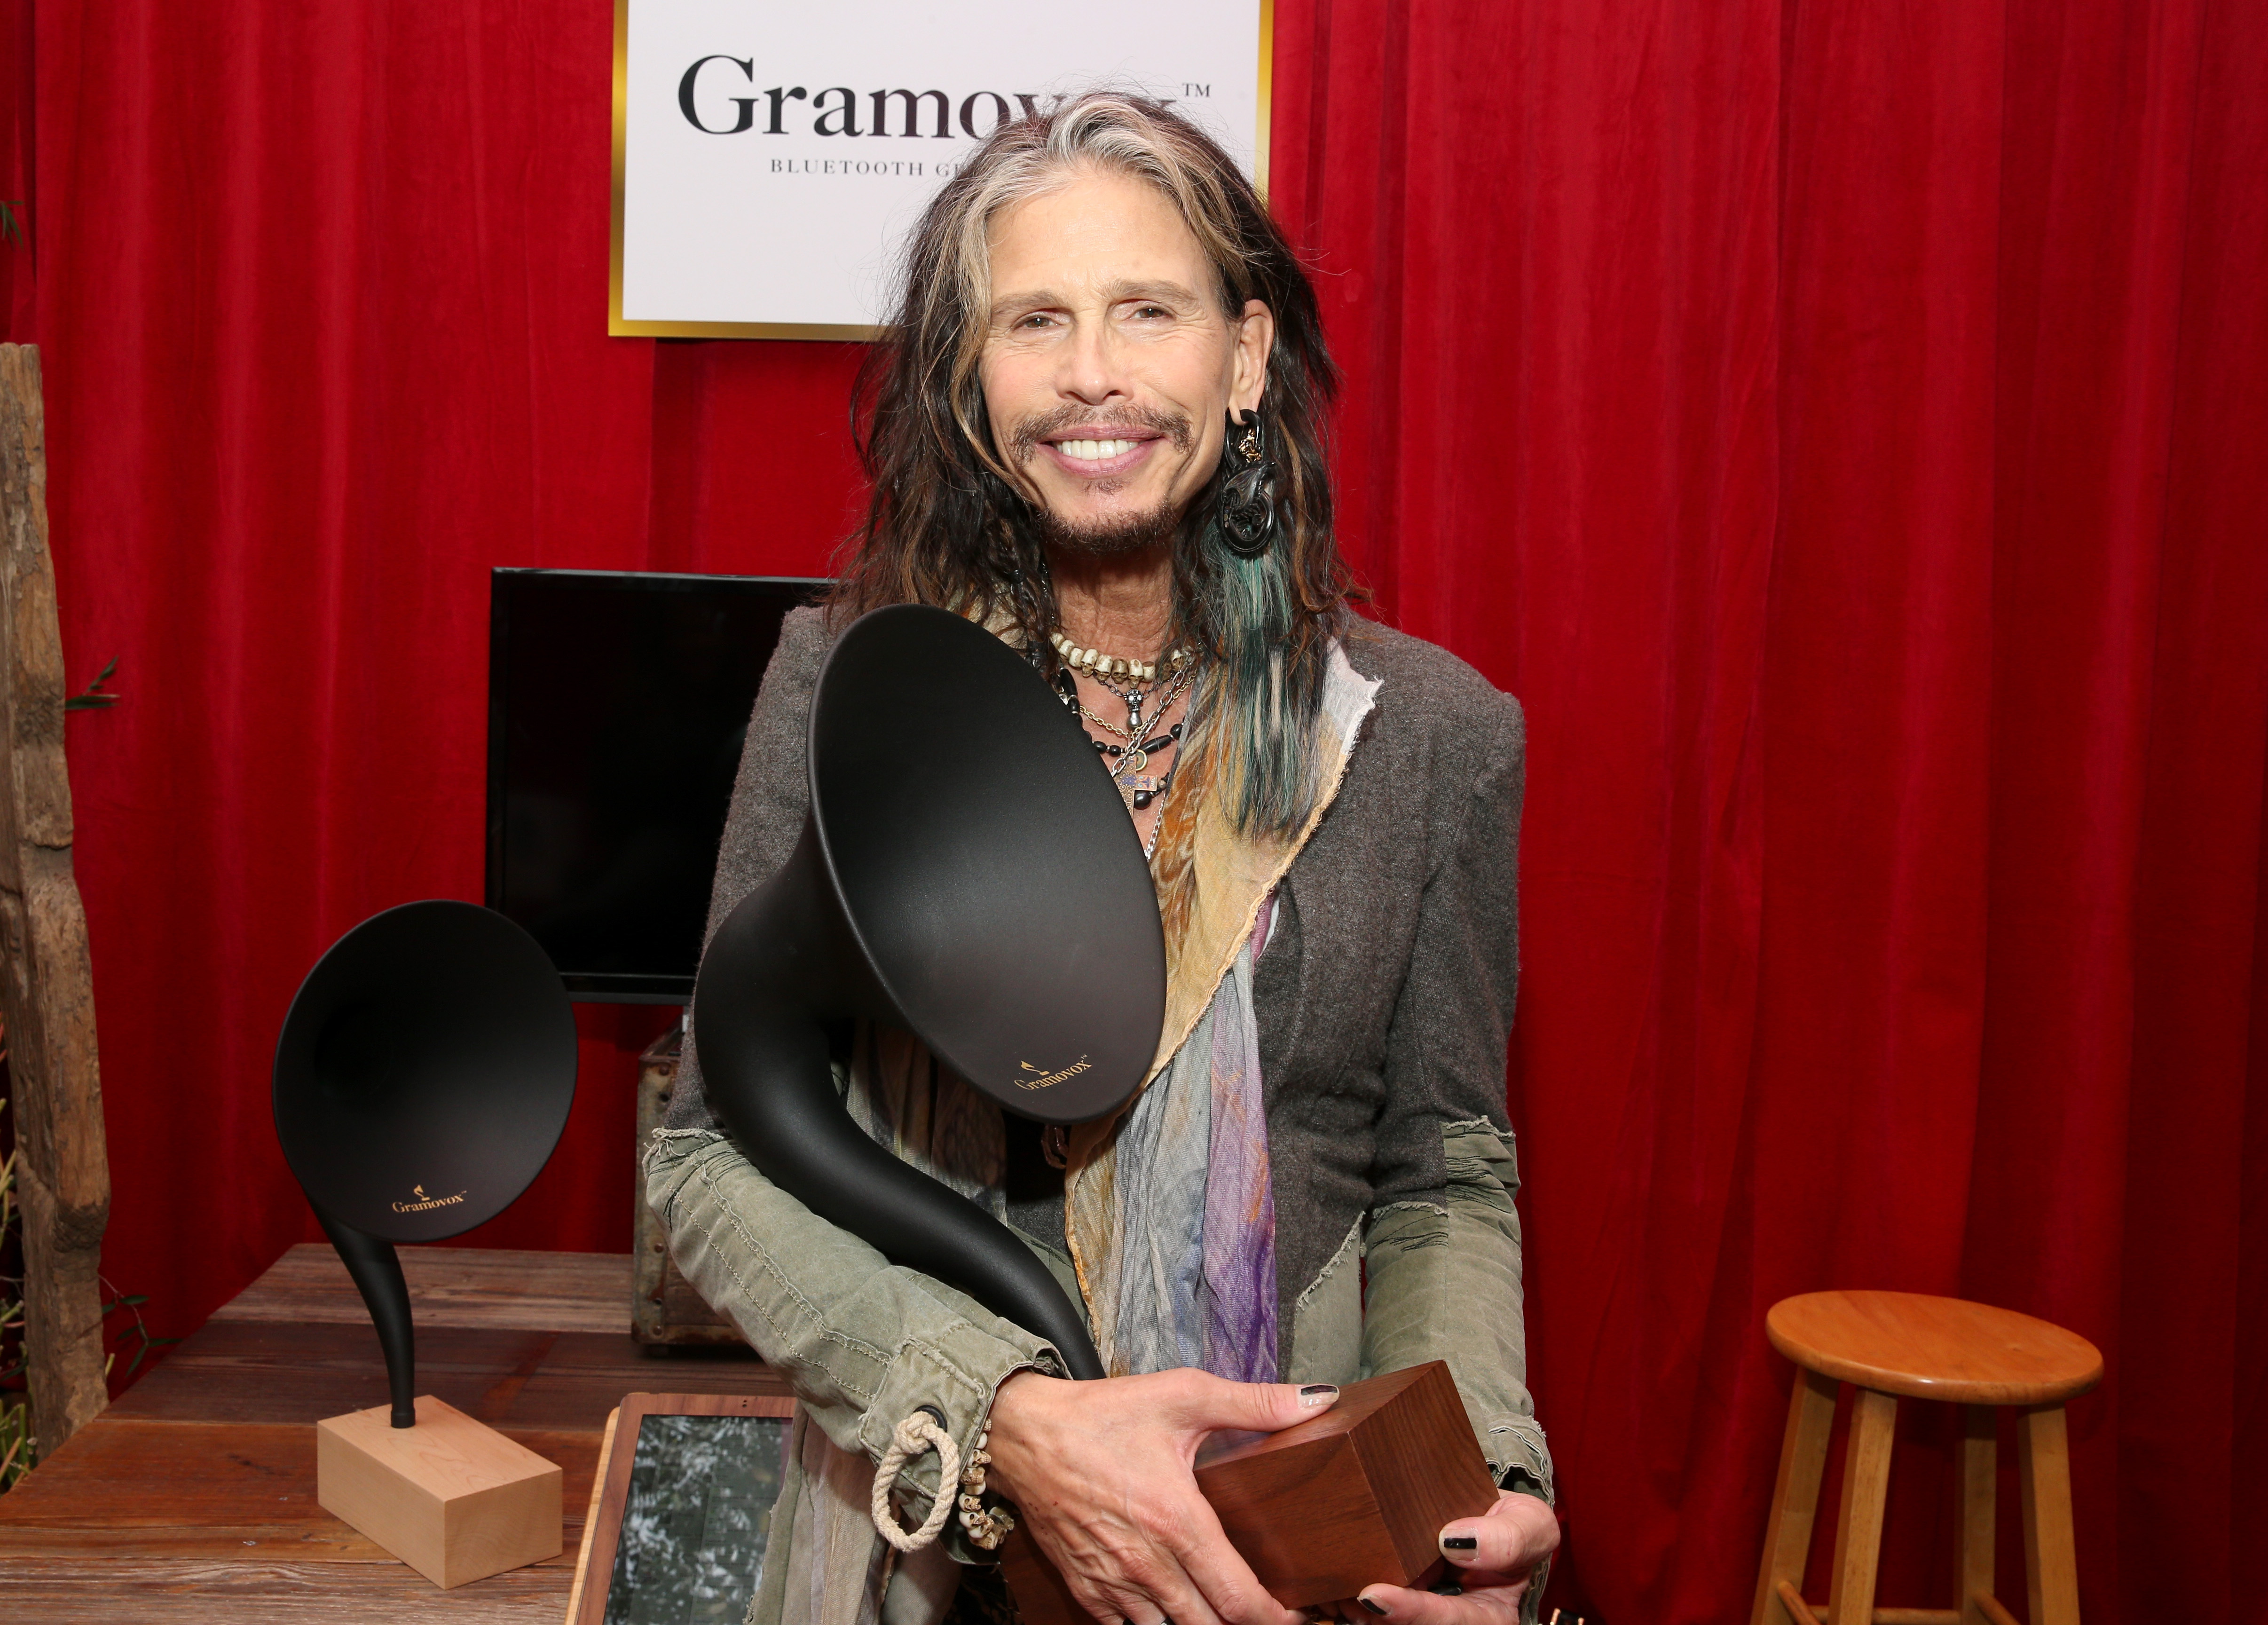 Recording artist Steven Tyler attends the GRAMMY Gift Lounge during the 56th Grammy Awards at Staples Center on January 24, 2014 in Los Angeles, California.  (Photo by Imeh Akpanudosen/WireImage)